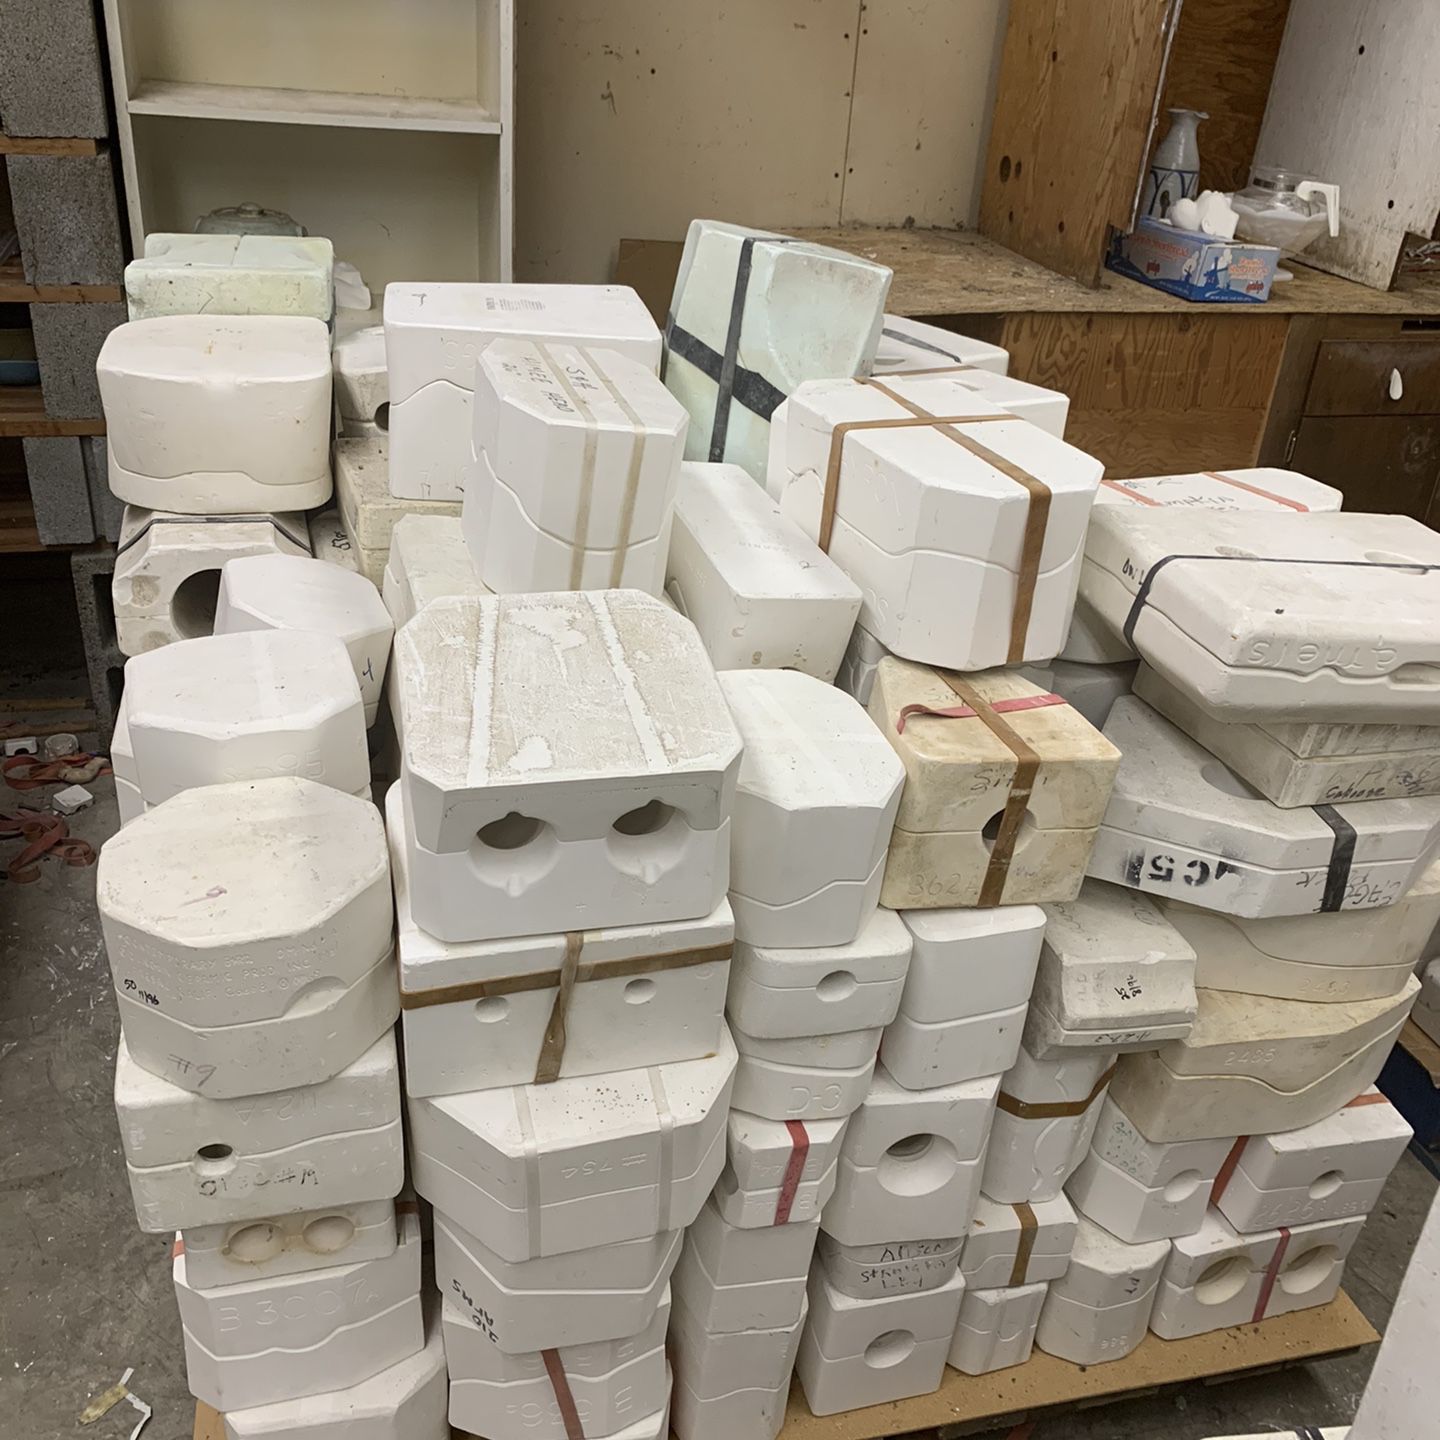 Ceramic casting molds for Sale in Federal Way, WA - OfferUp